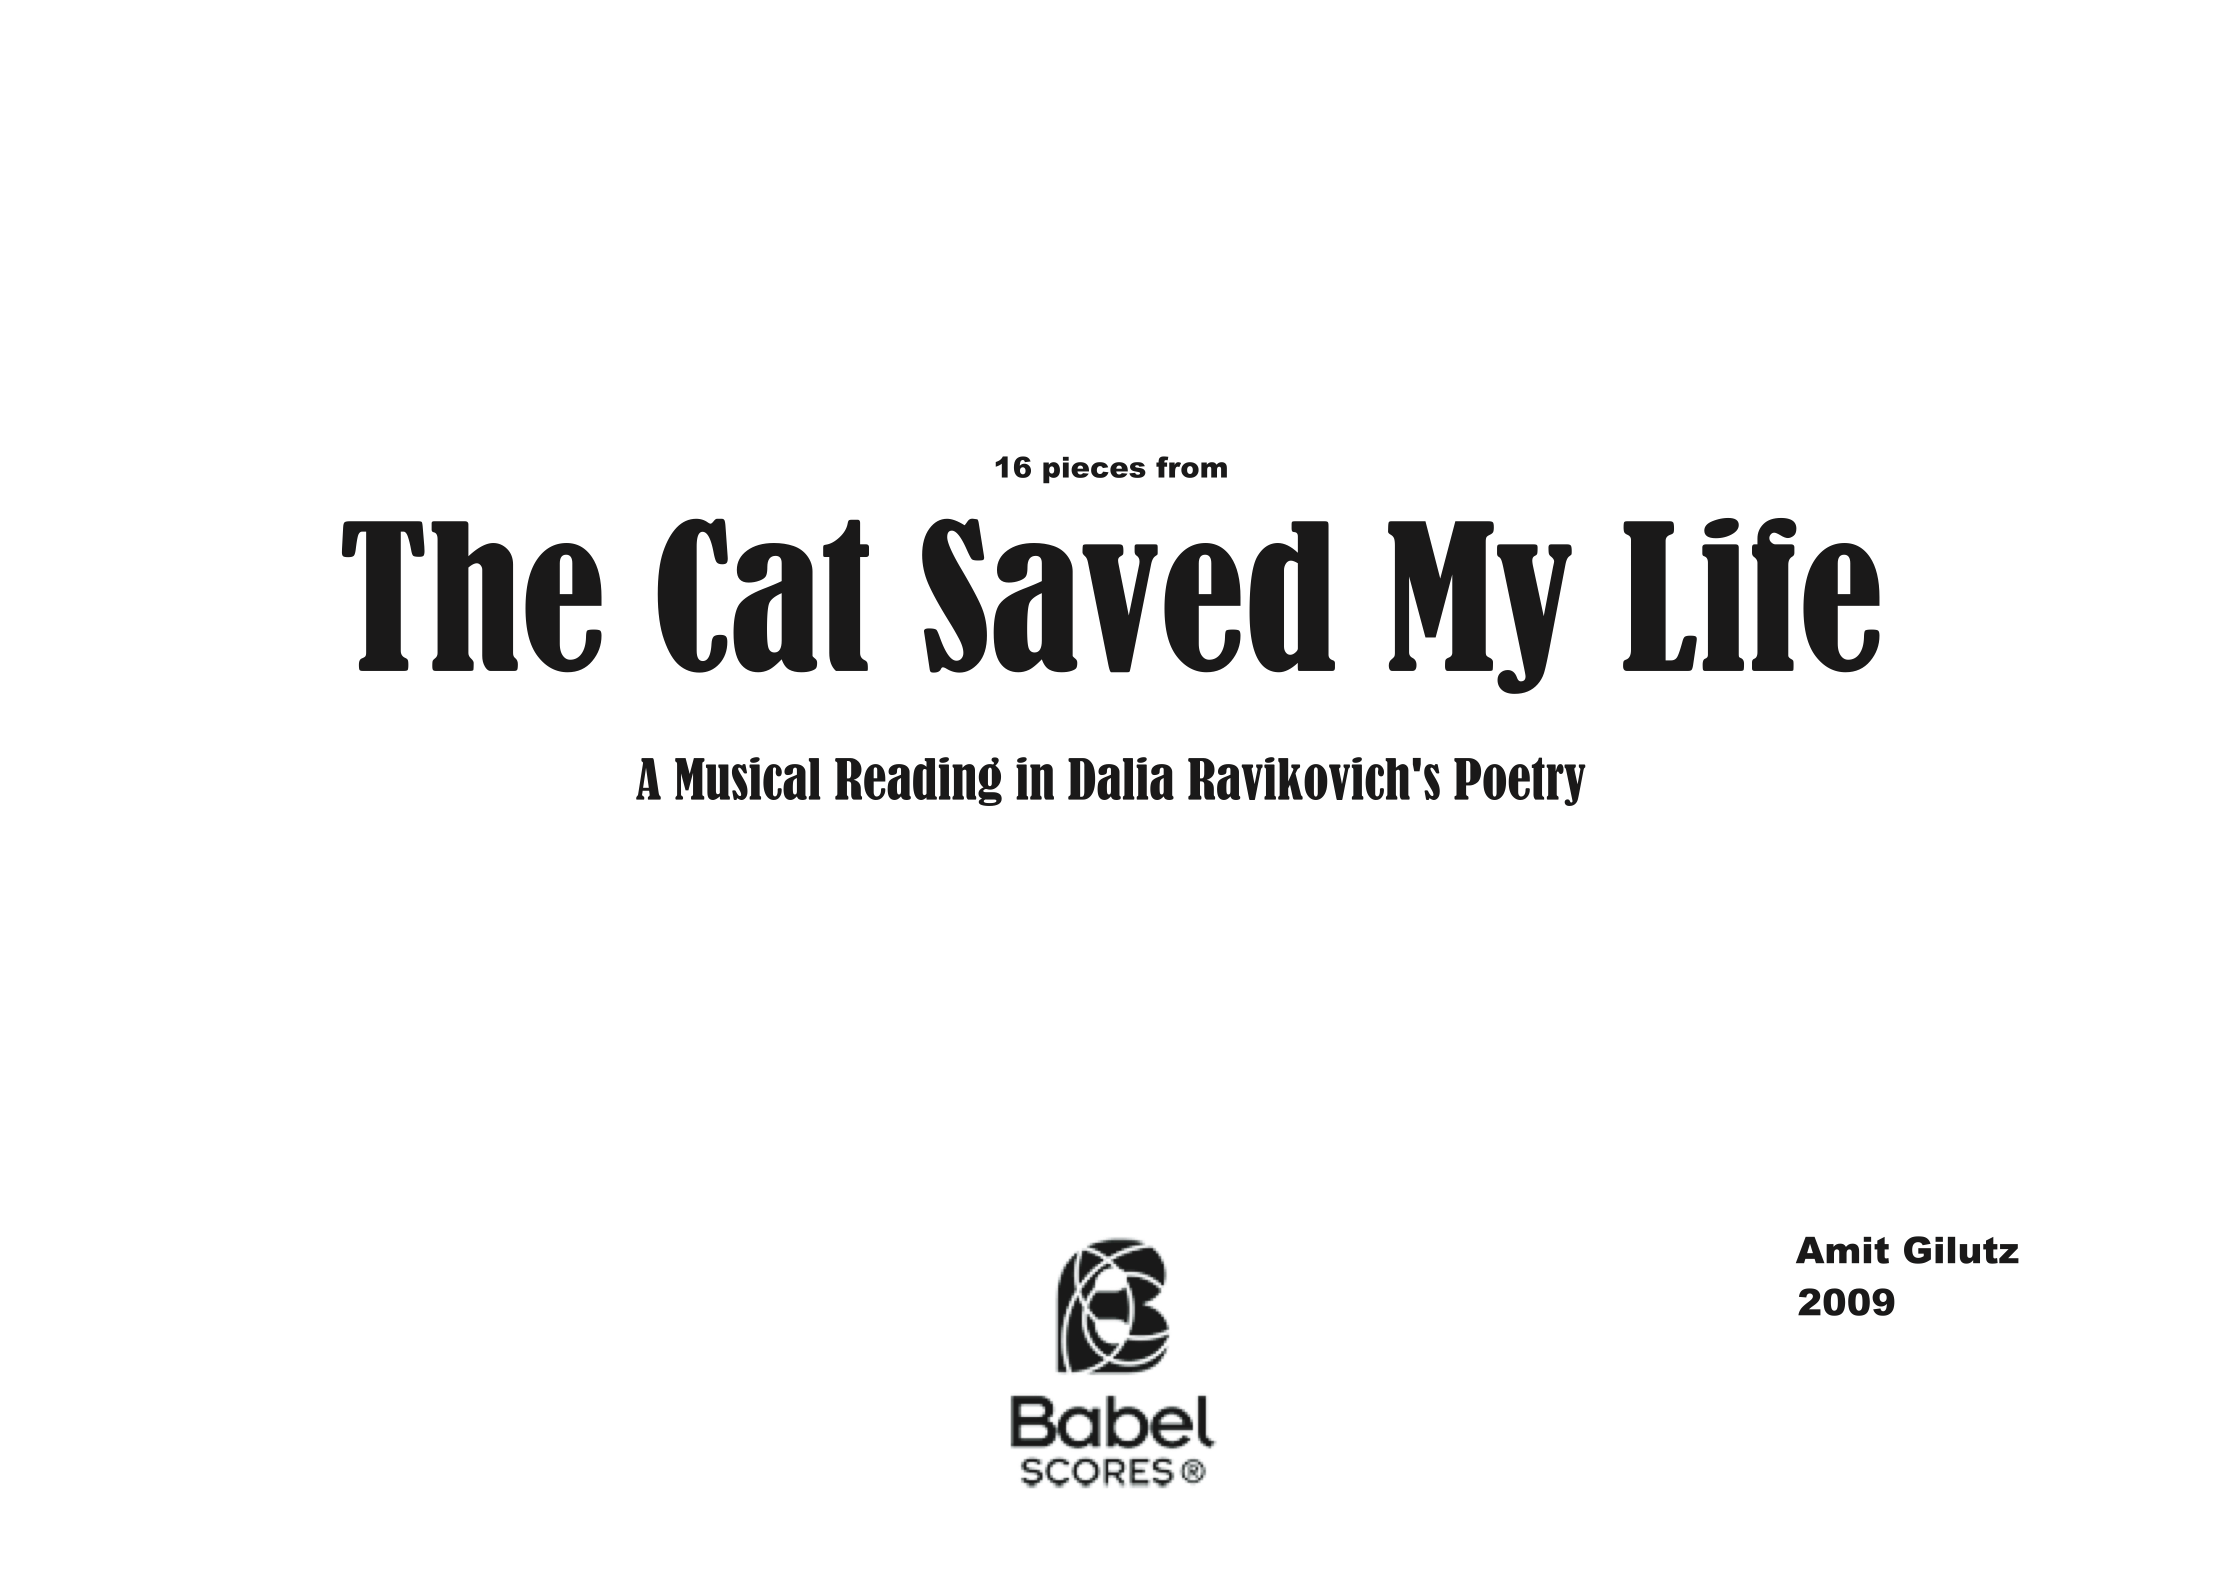 The Cat Saved My Life